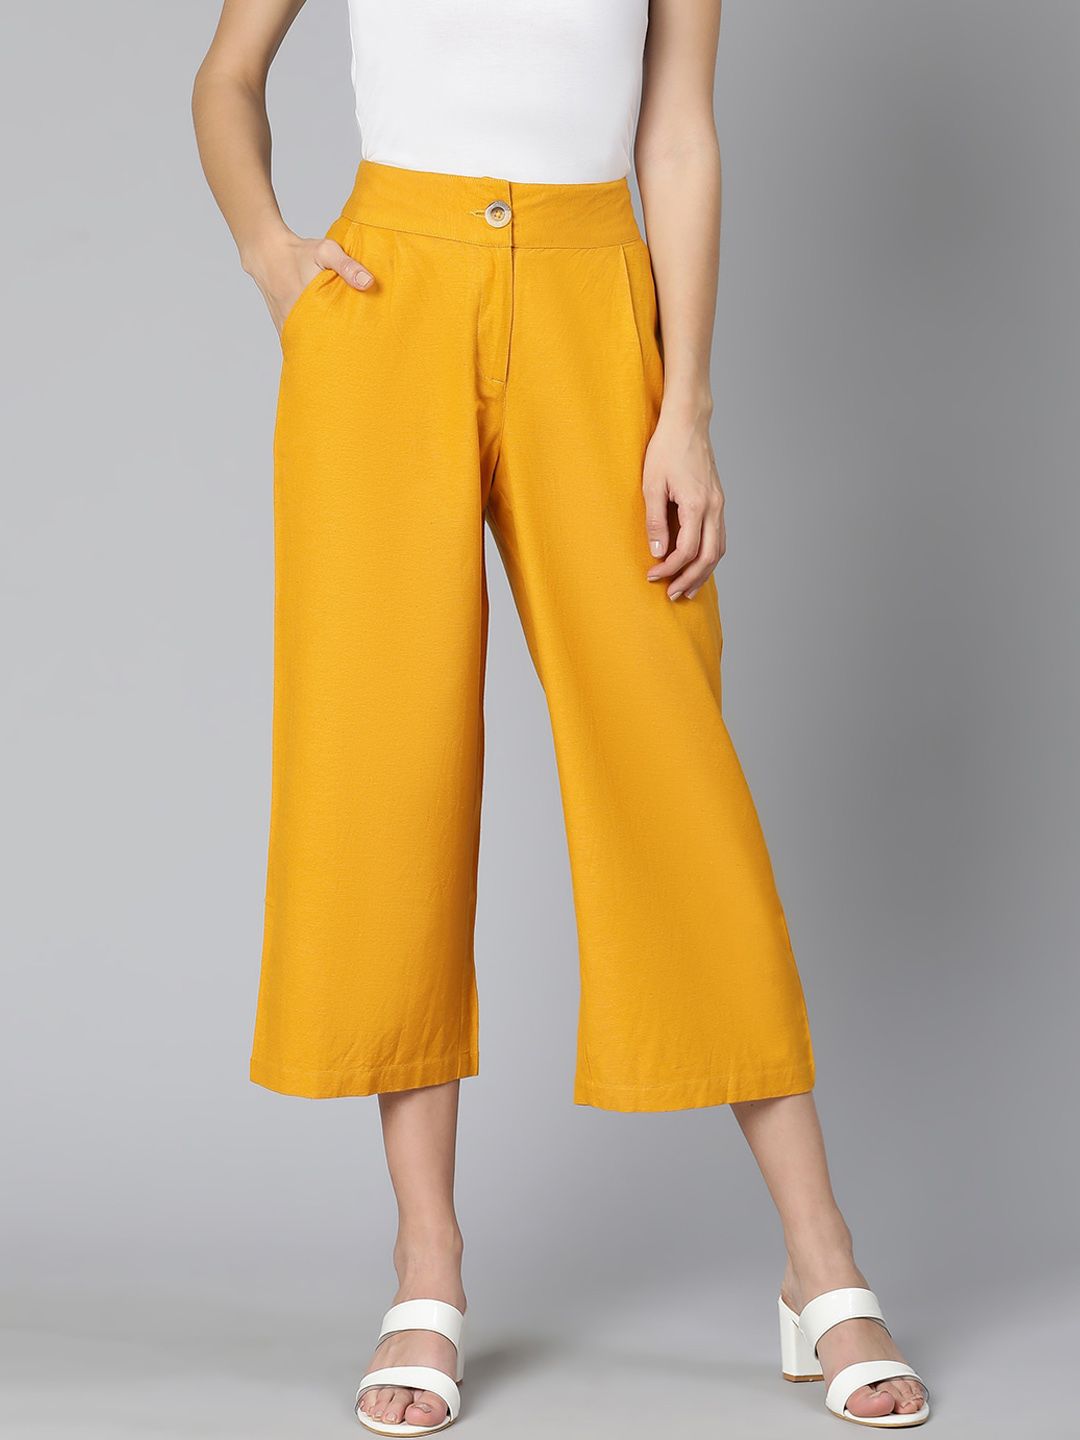 Oxolloxo Women Mustard Yellow Culottes Trousers Price in India